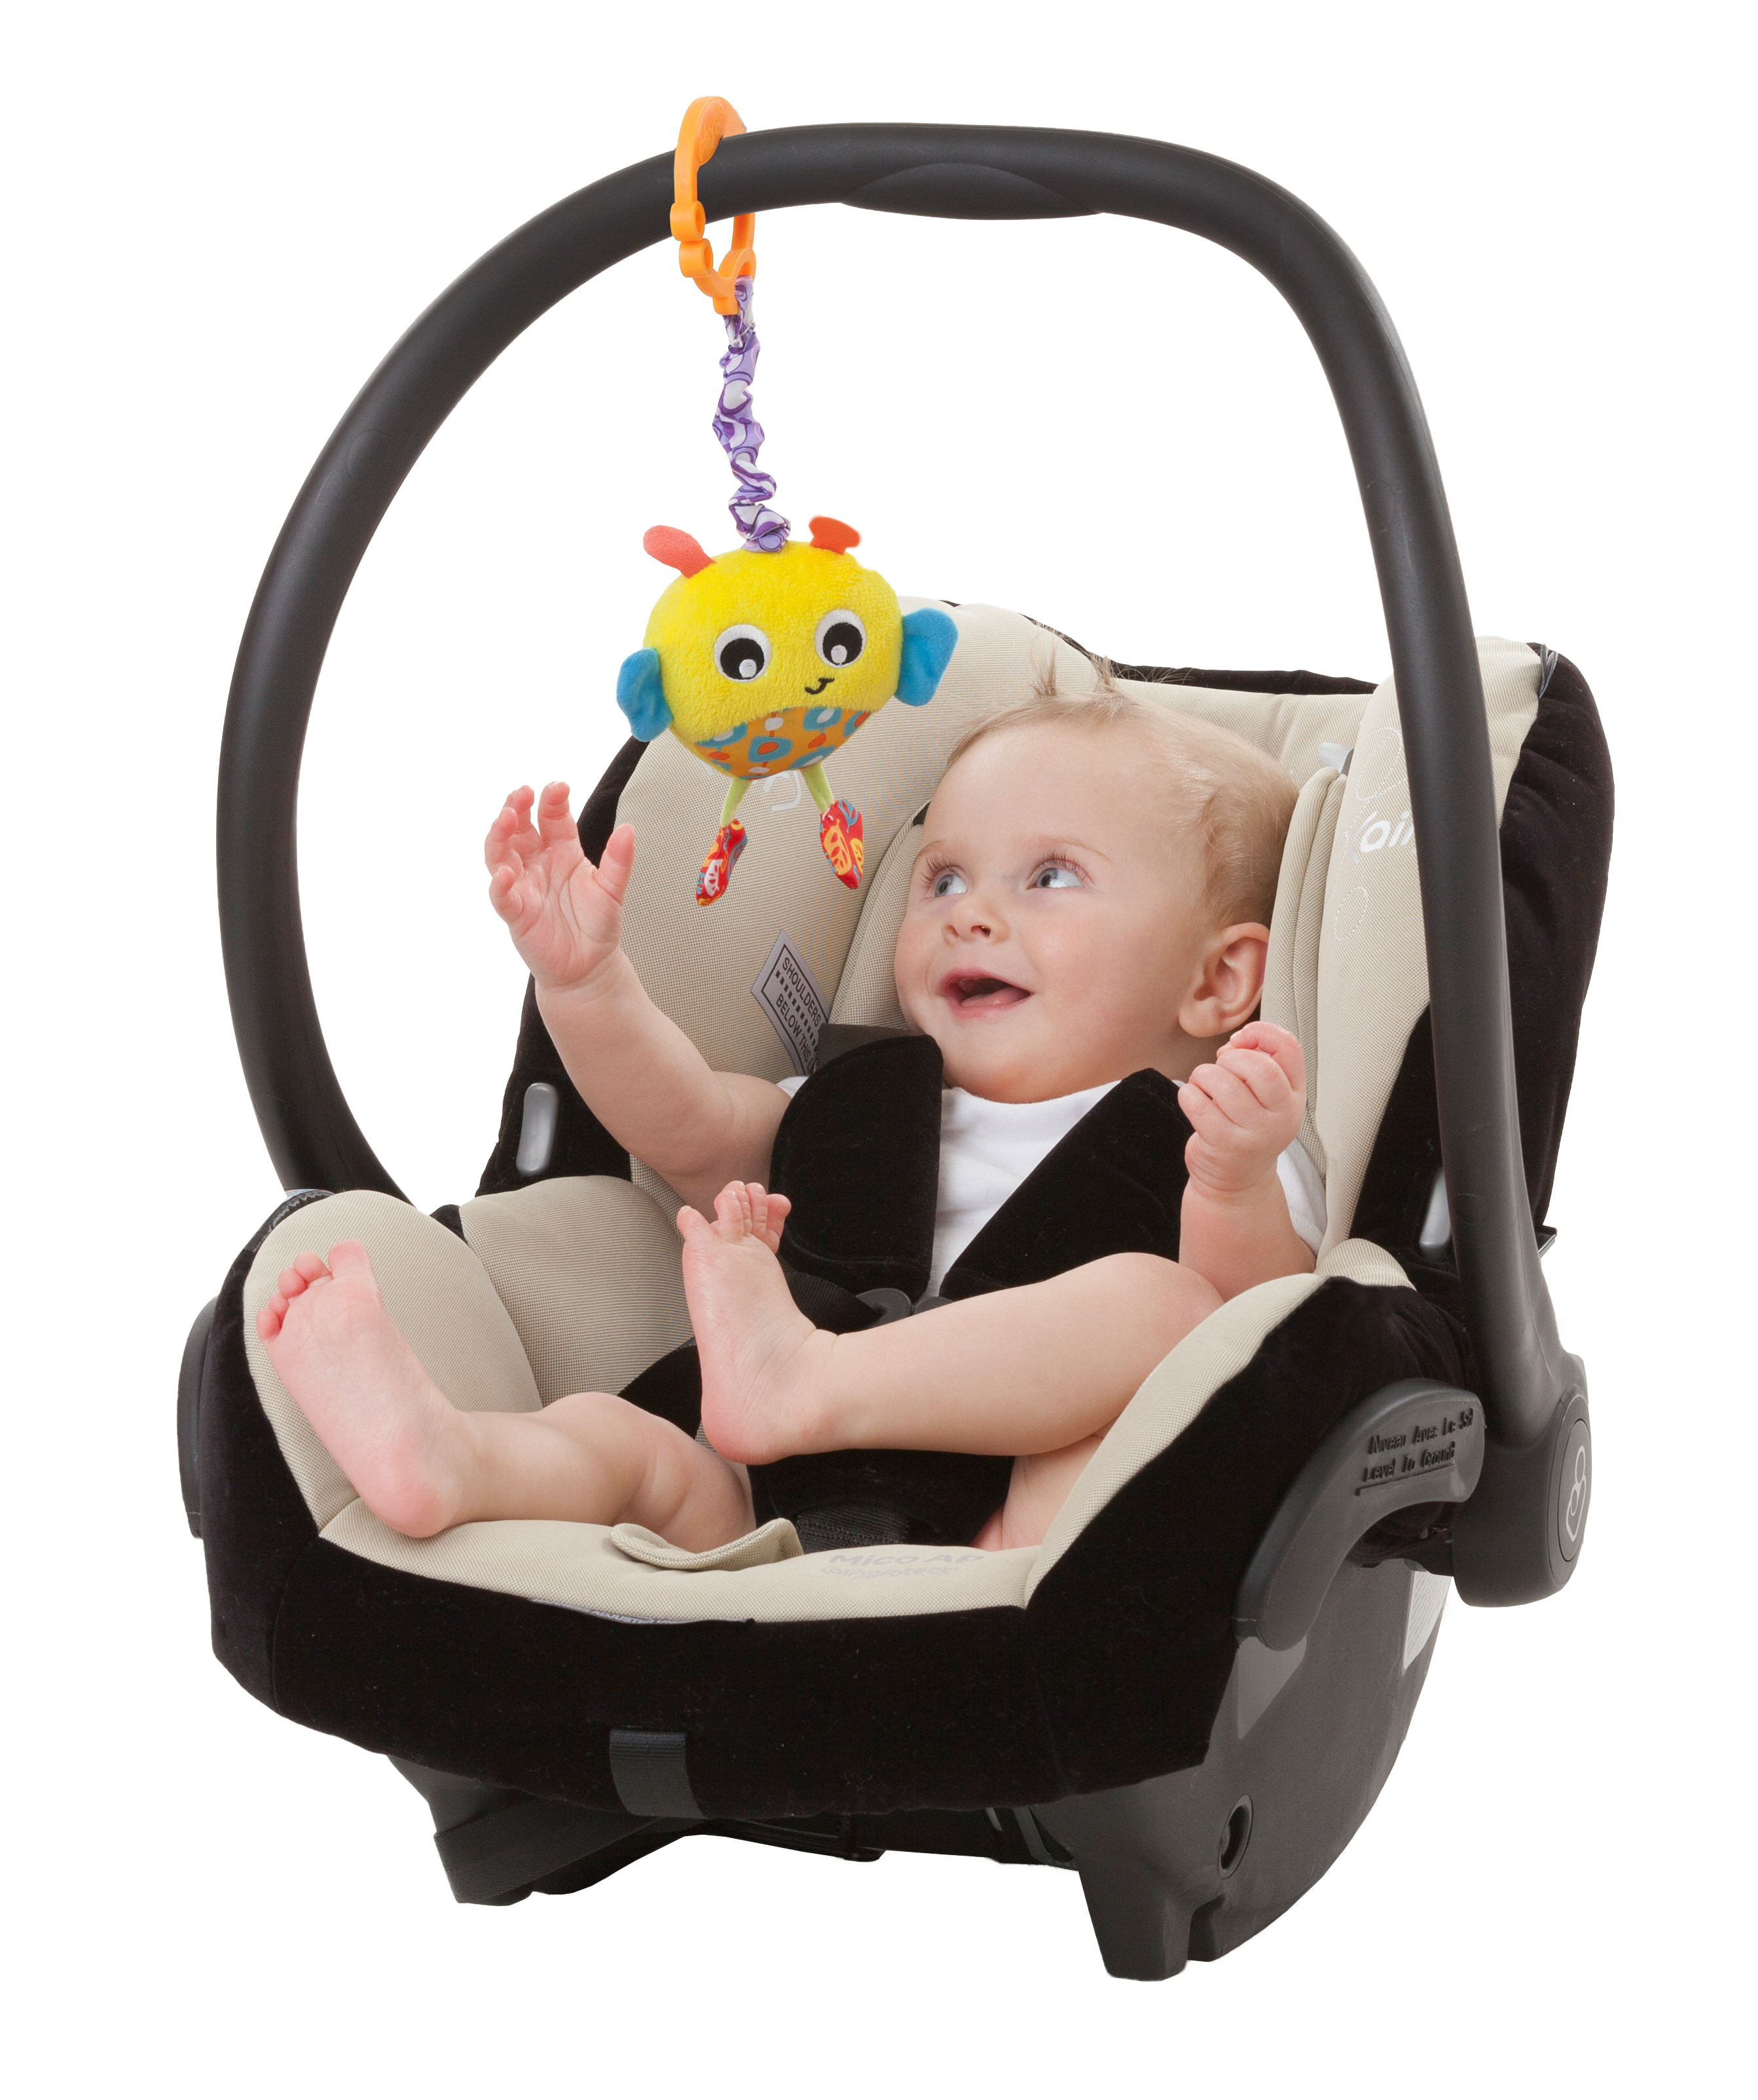 Playgro Wiggling Bertie Bee, STEM Toy for a bright future - image 2 of 2